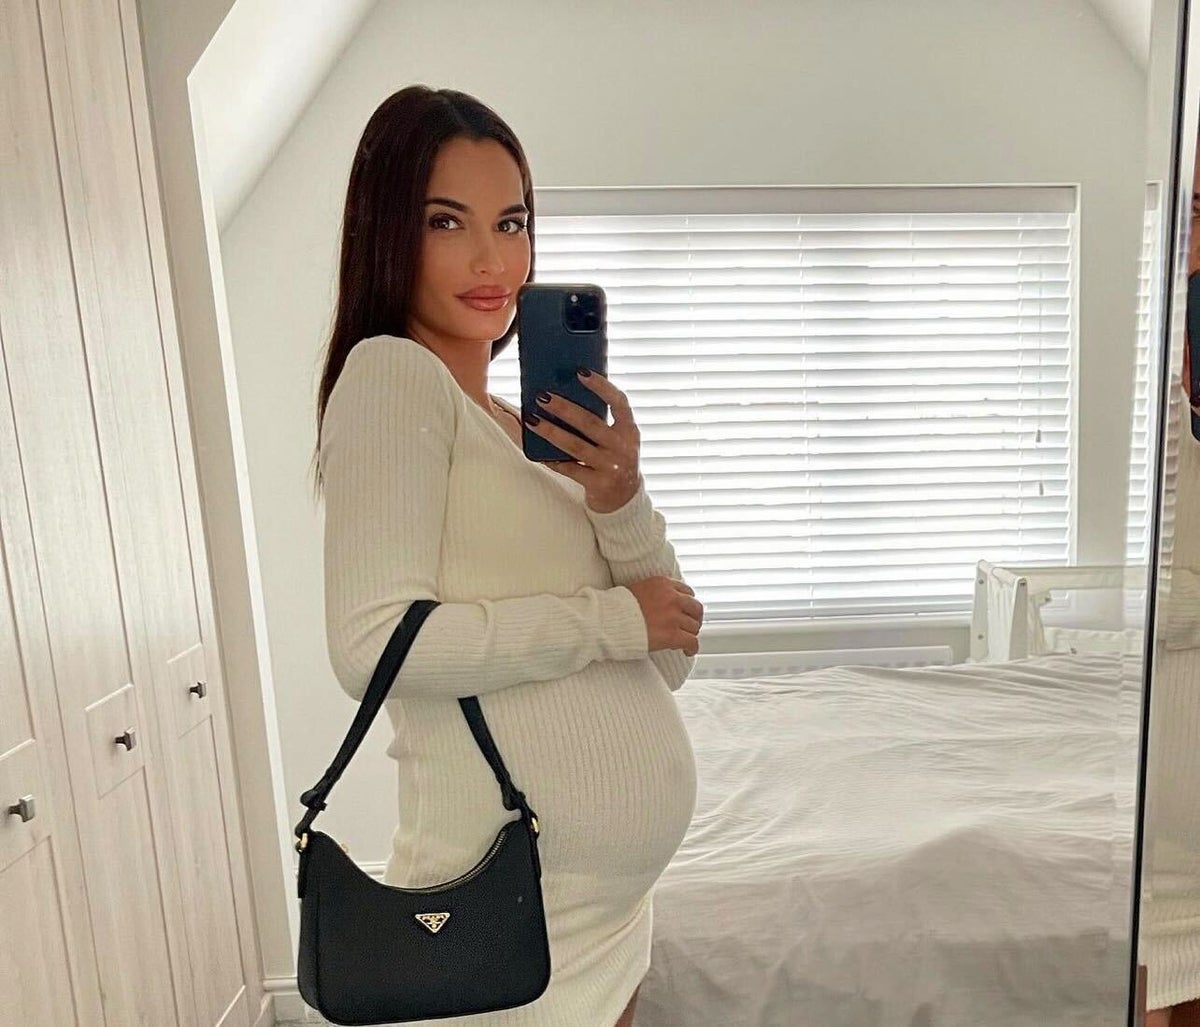 ITV’s The Only Way Is Essex star Nicole Bass welcomes baby girl